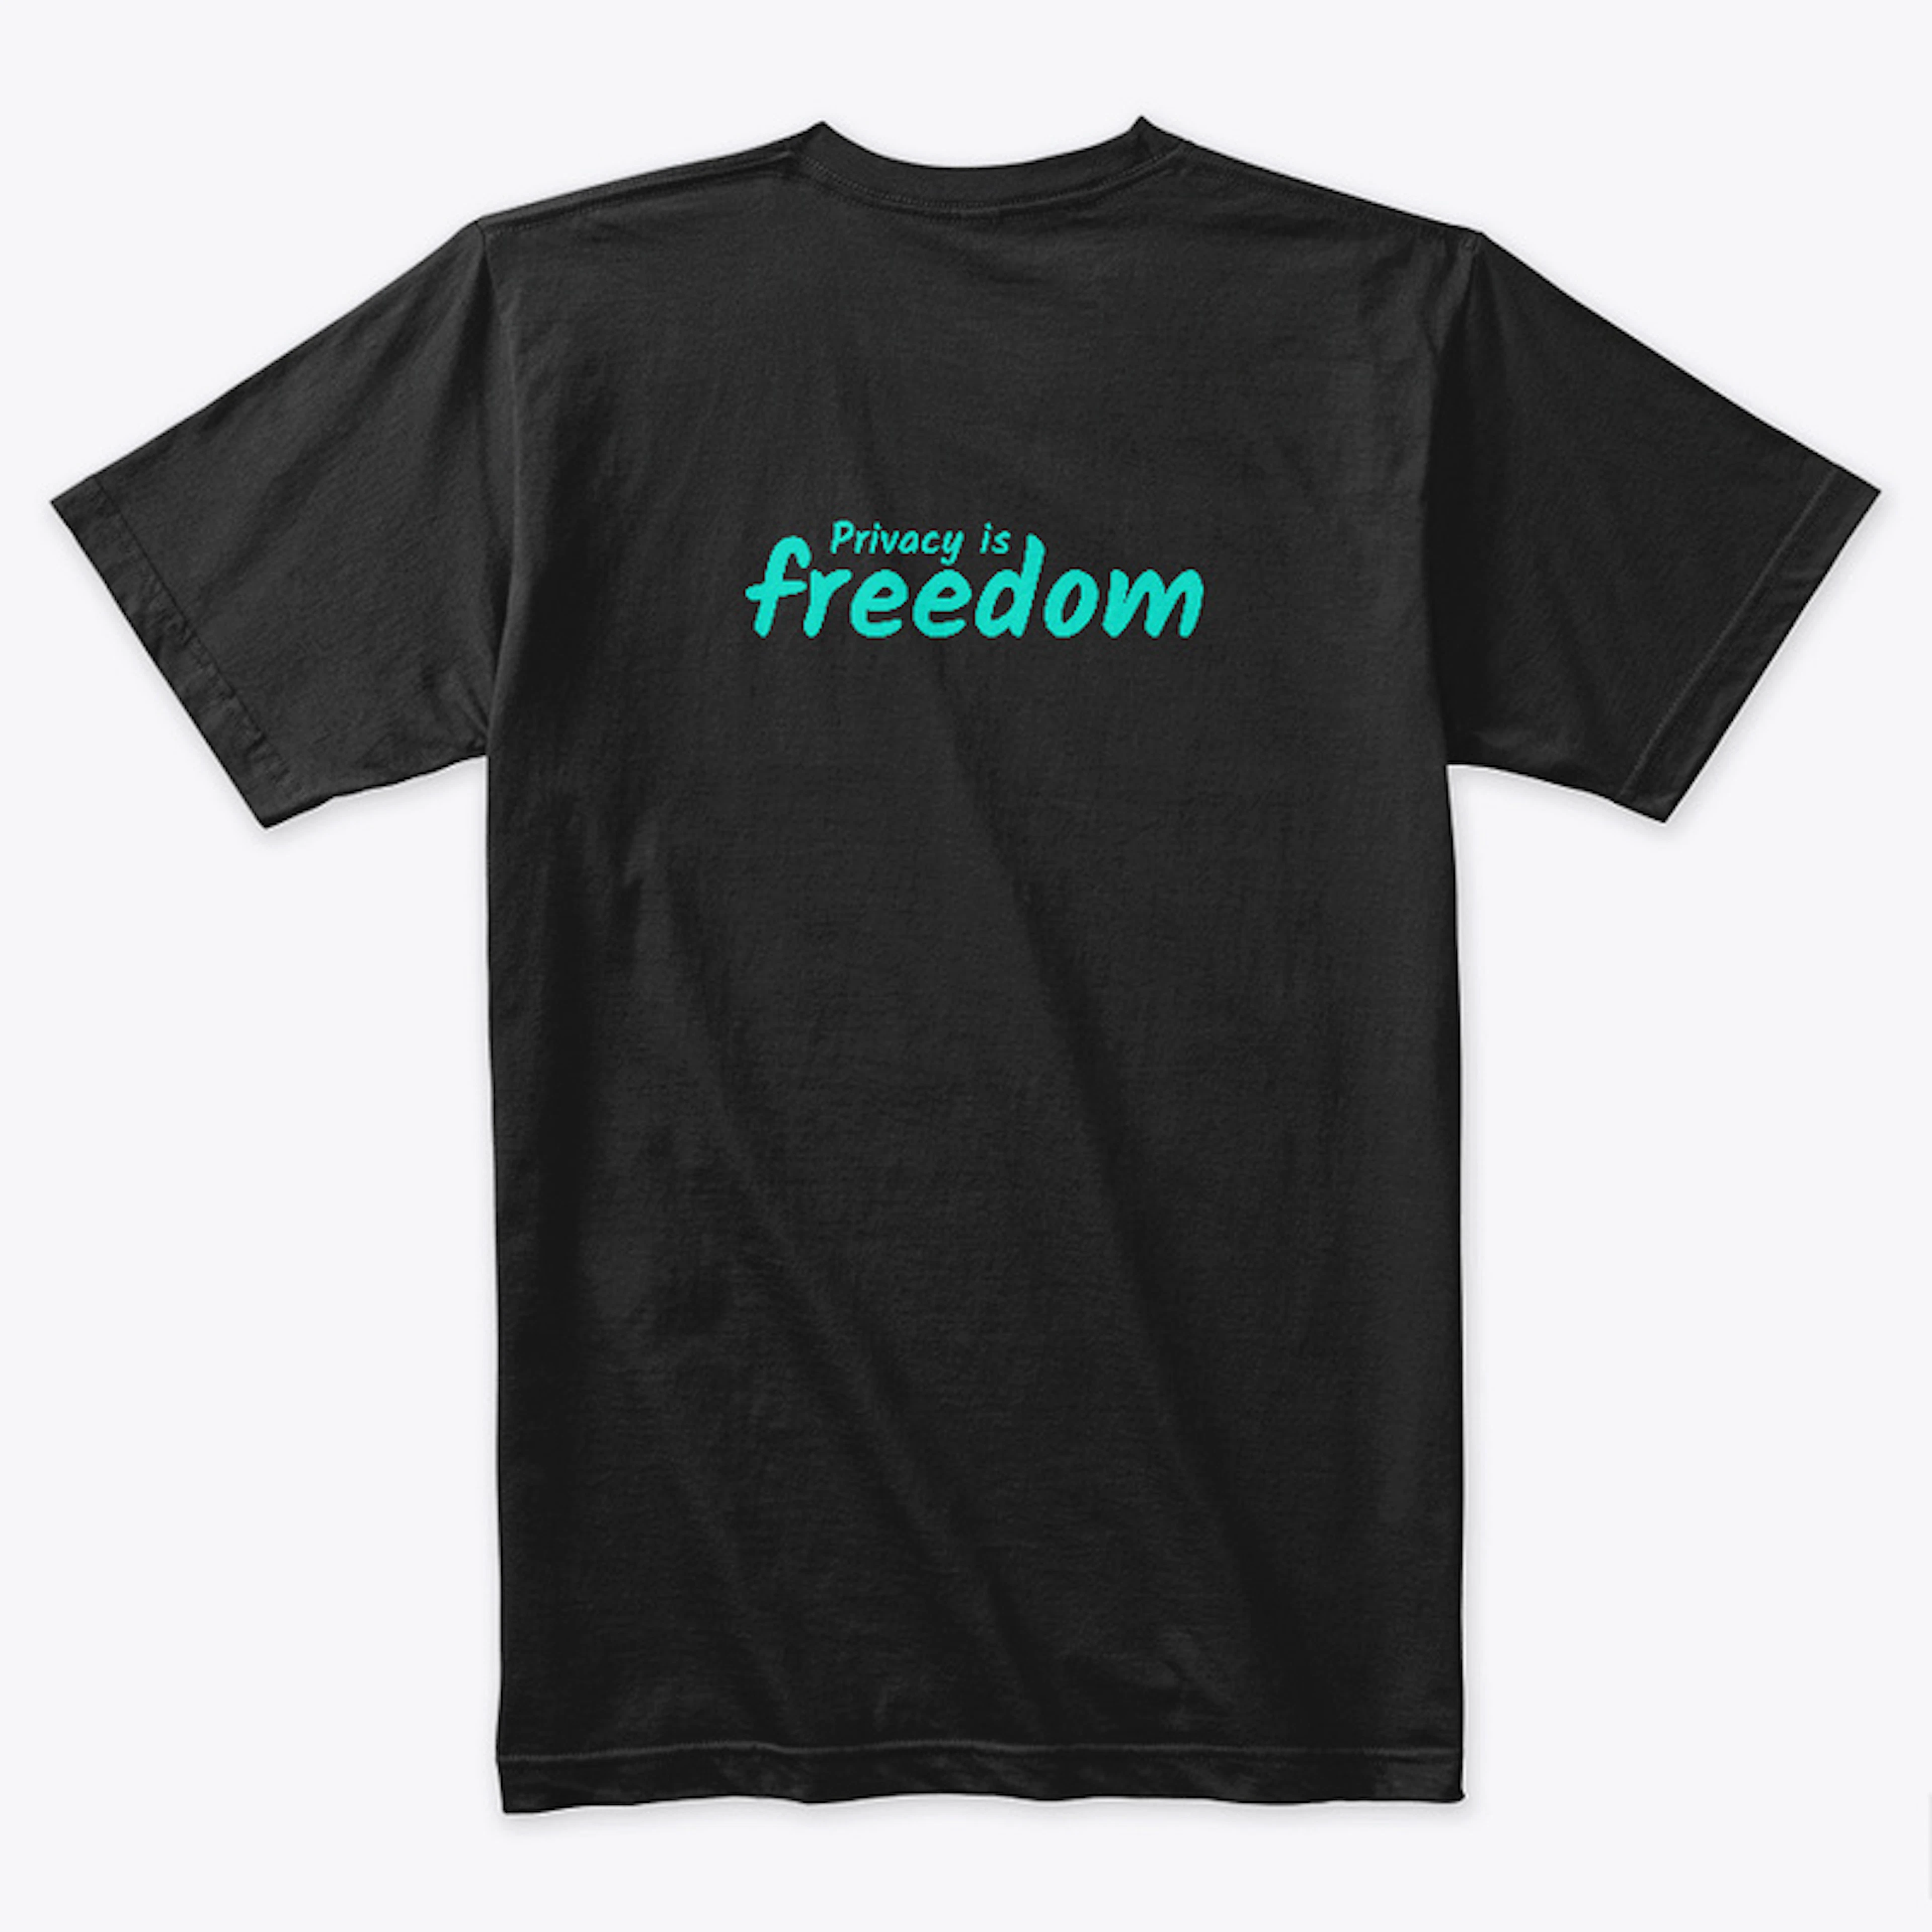 Privacy is freedom Shirt